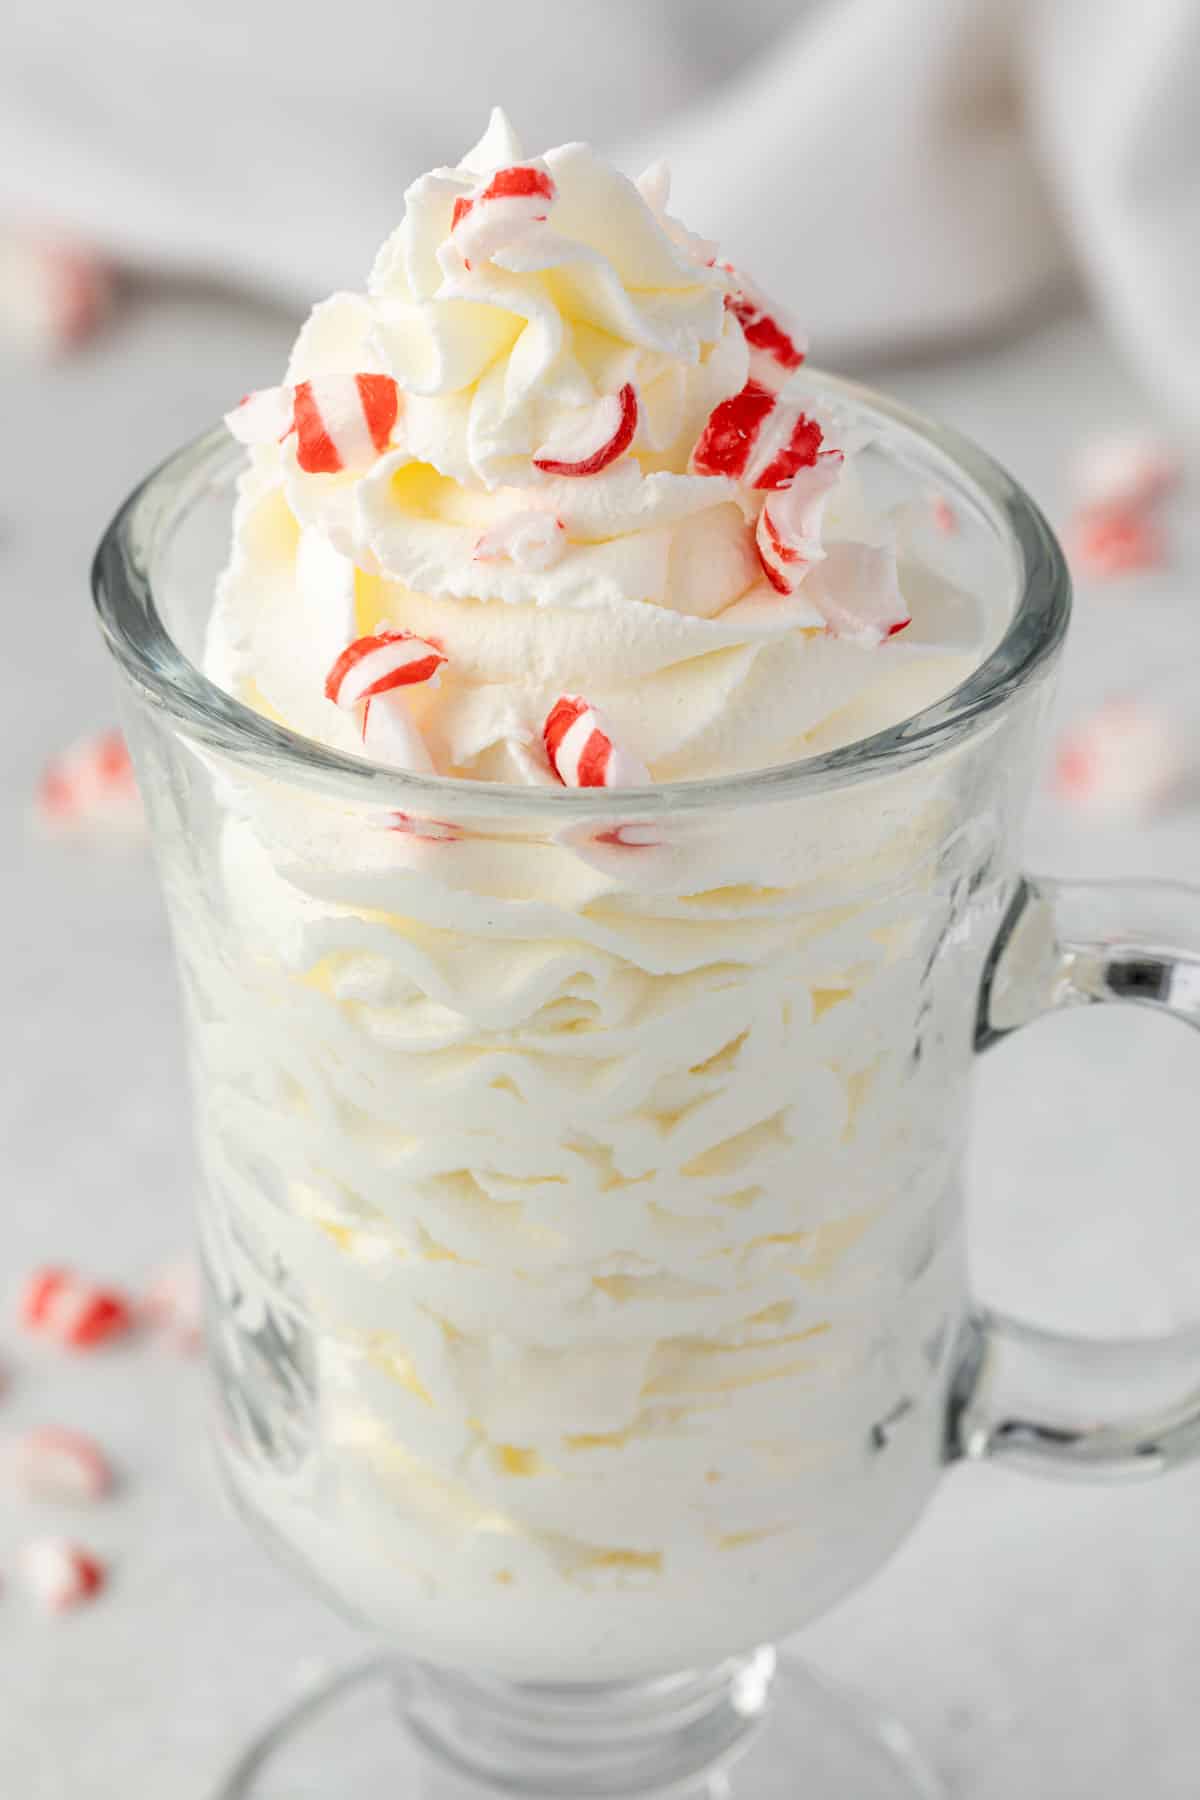 Whipped cream piped into a mug topped with peppermint candies.